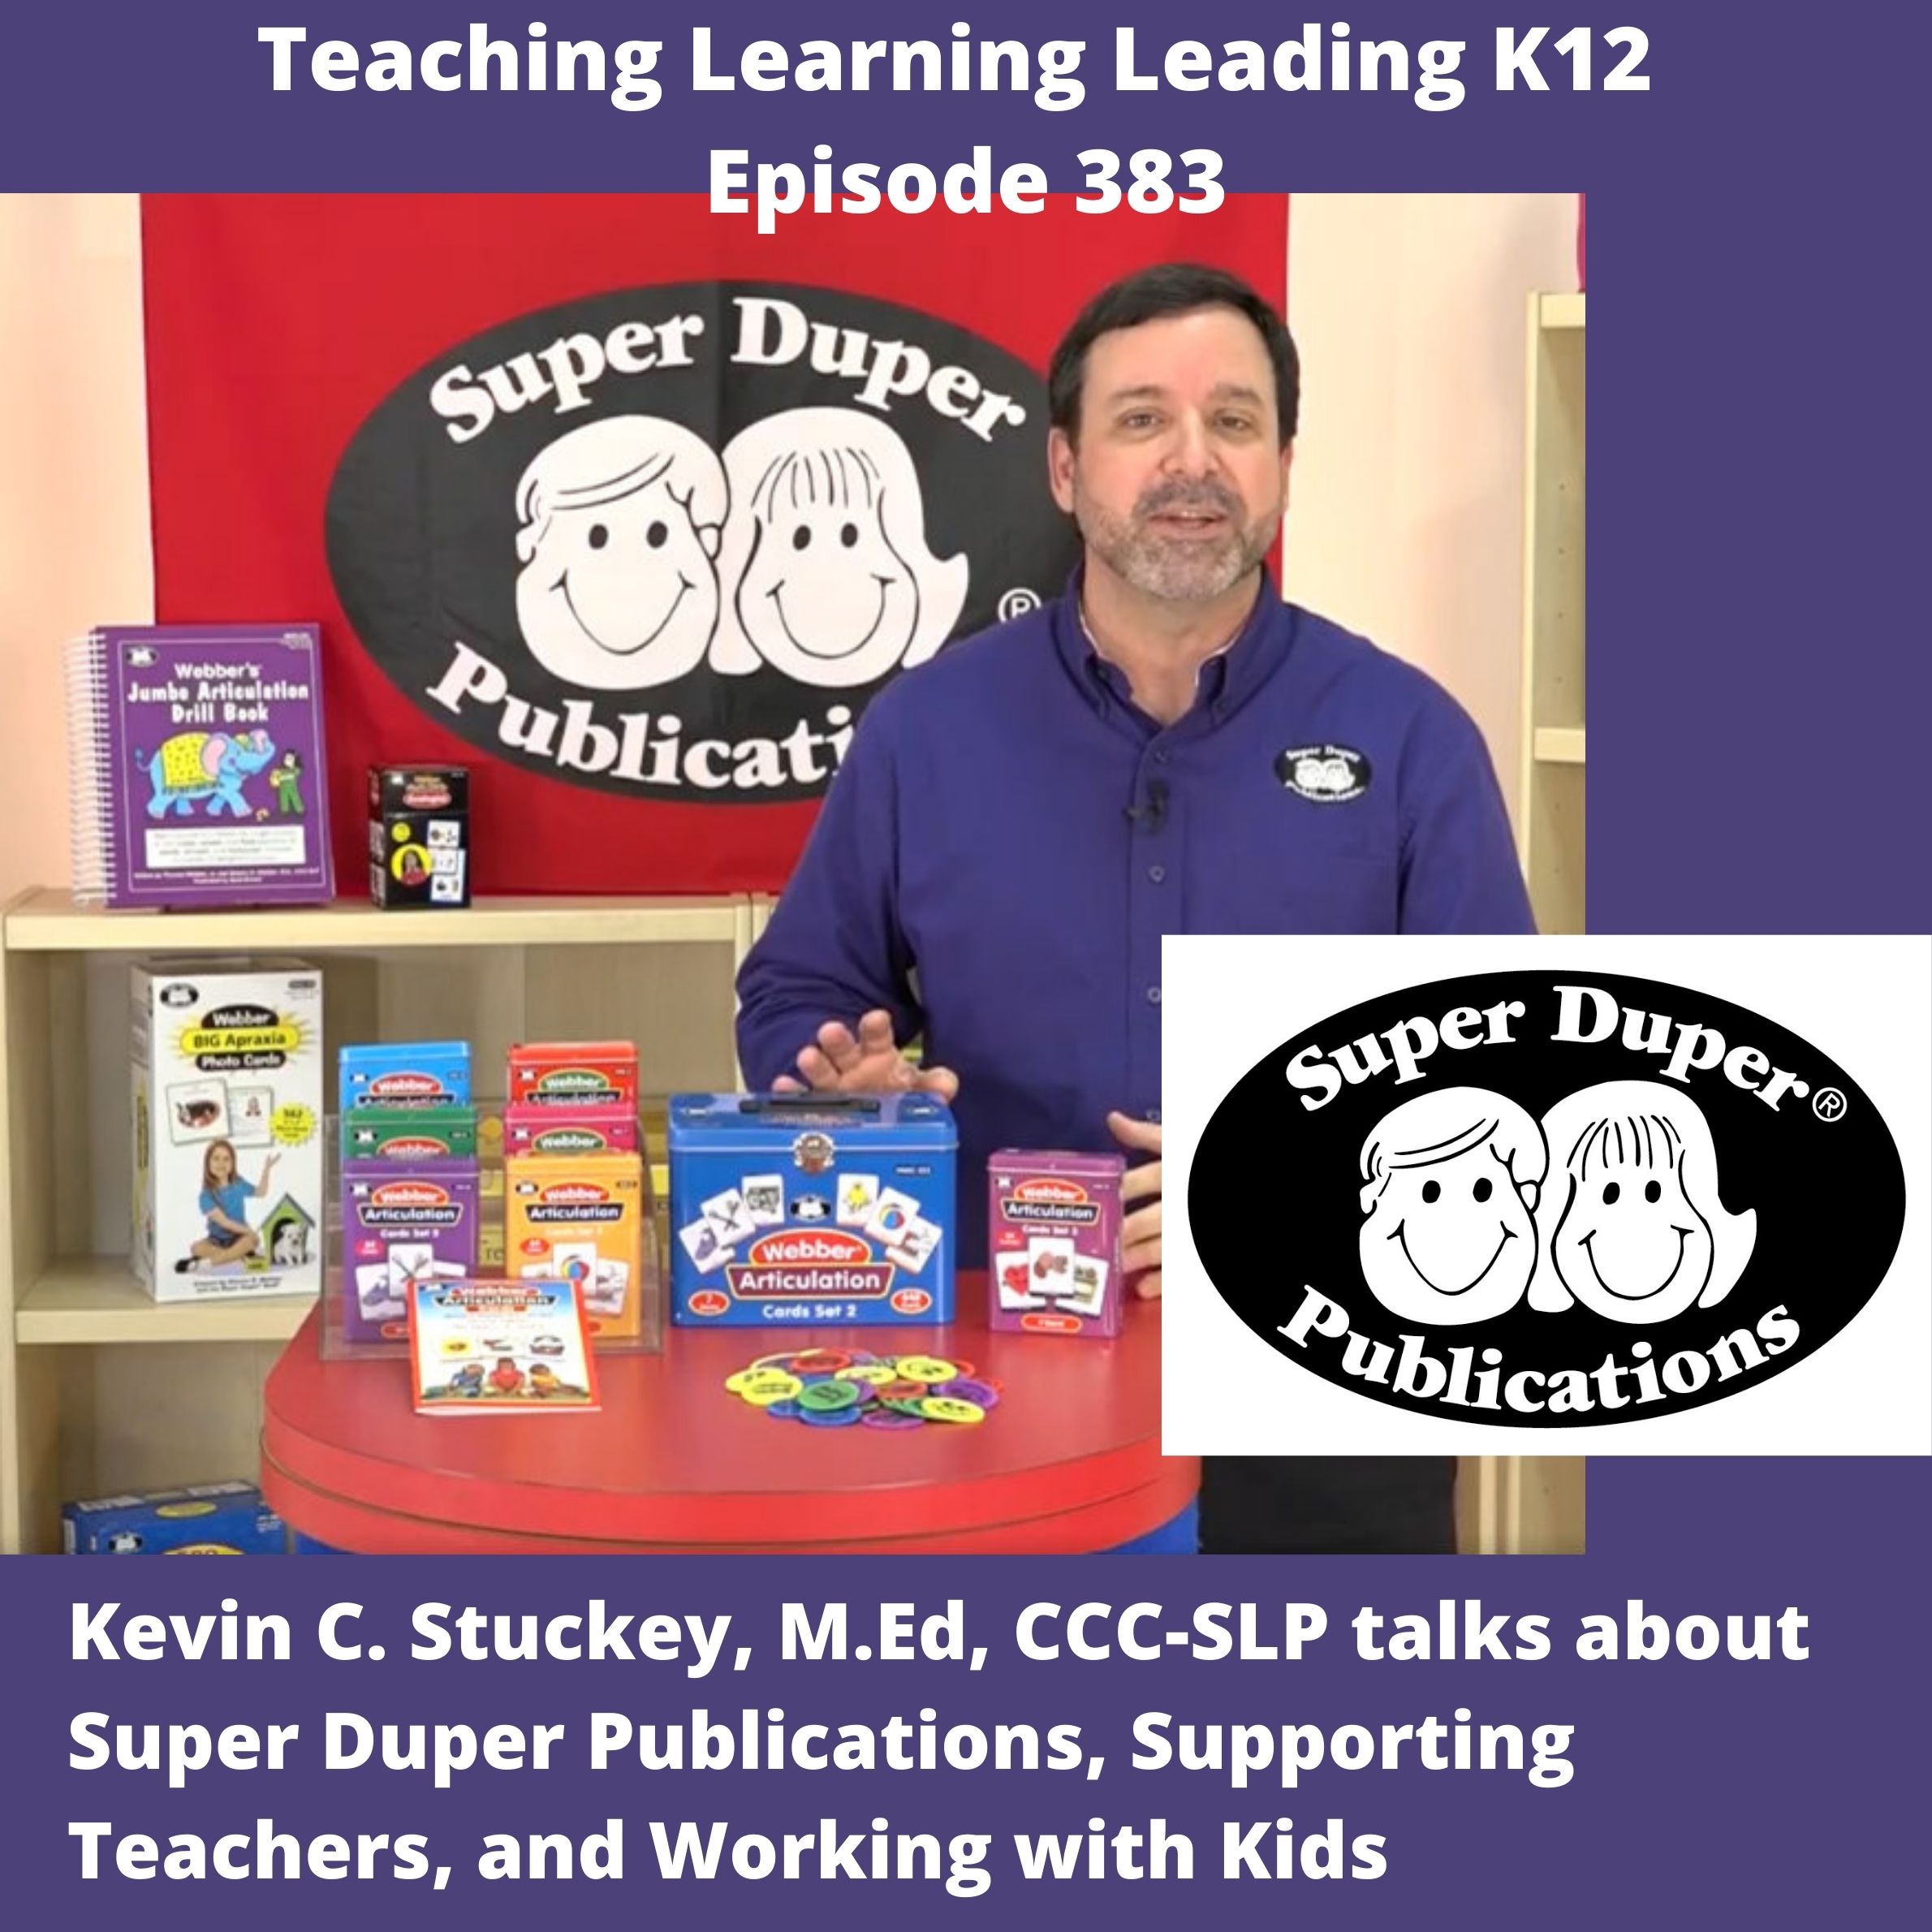 Kevin C. Stuckey MEd, CCC-SLP talks about Super Duper Publications, Supporting Teachers, and Working with Kids - 383 Image